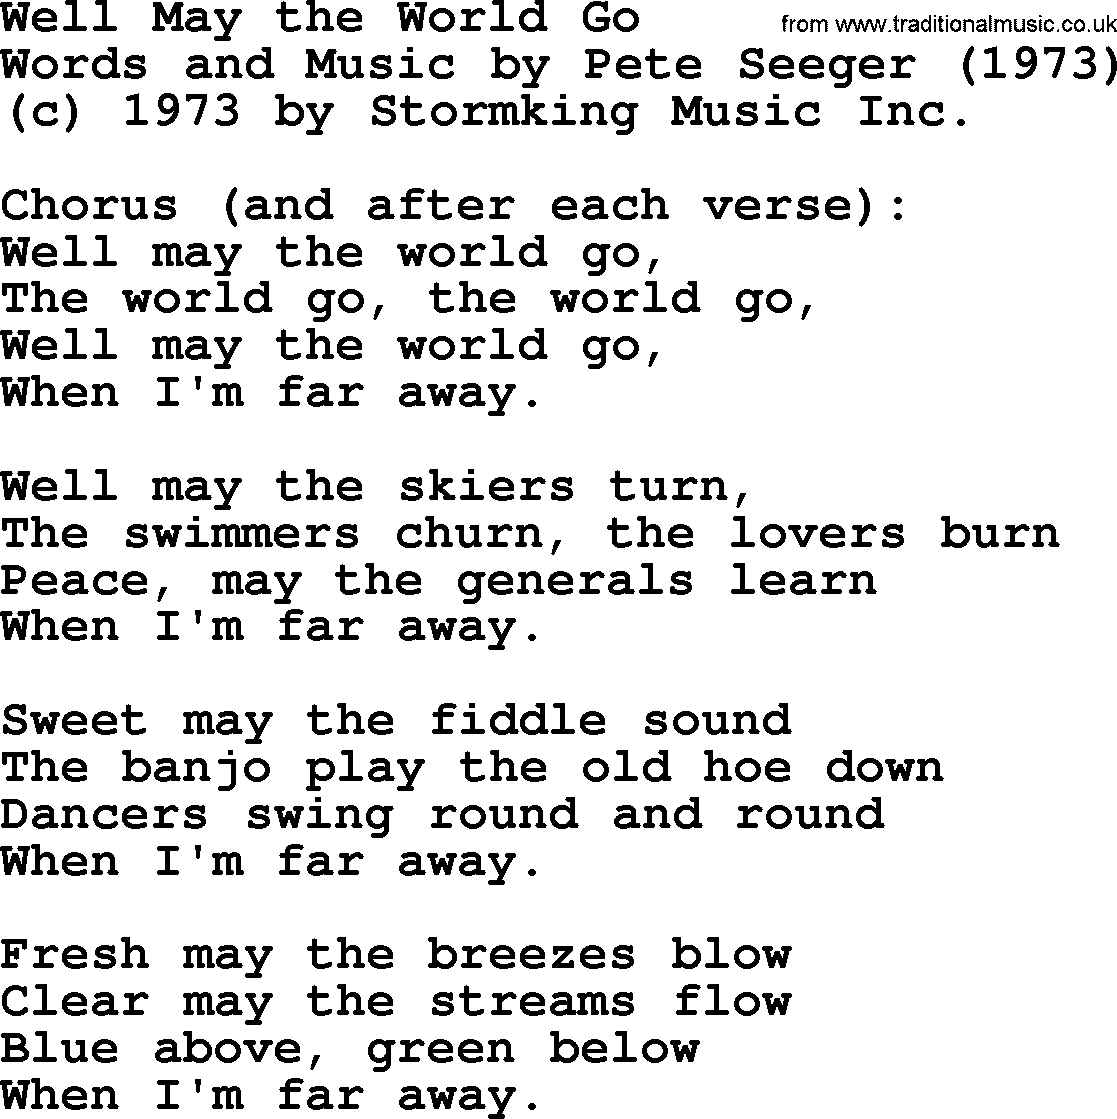 Pete Seeger song Well May the World Go-Pete-Seeger.txt lyrics